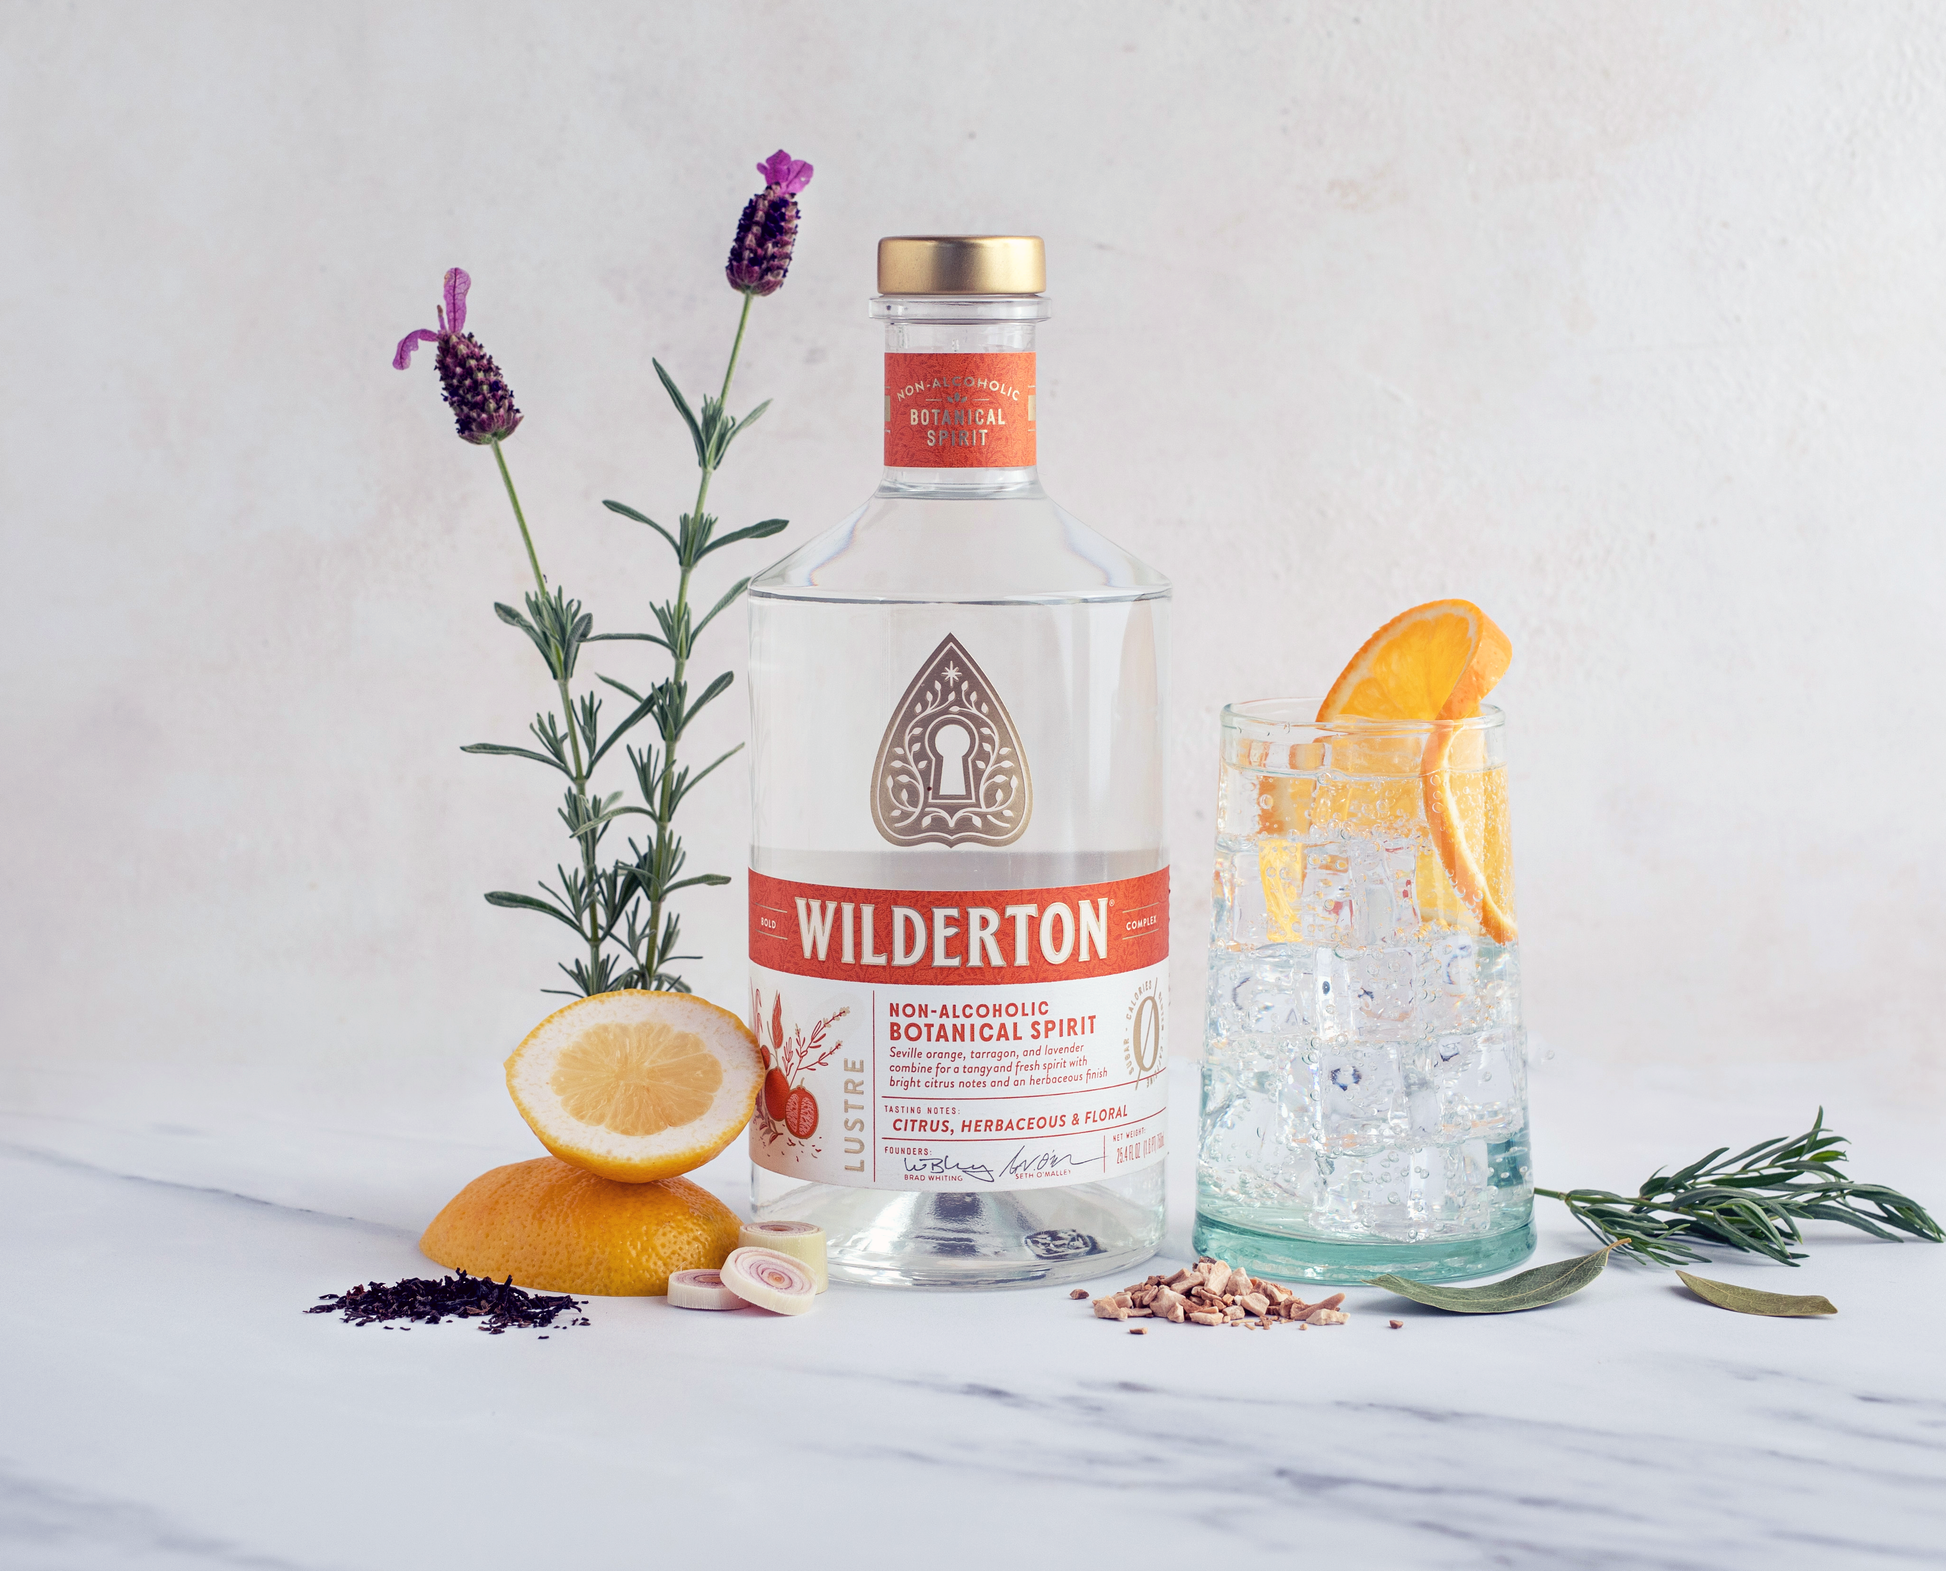 bottle of wilderton lustre surrounded by botanicals and a glass with a clear drink